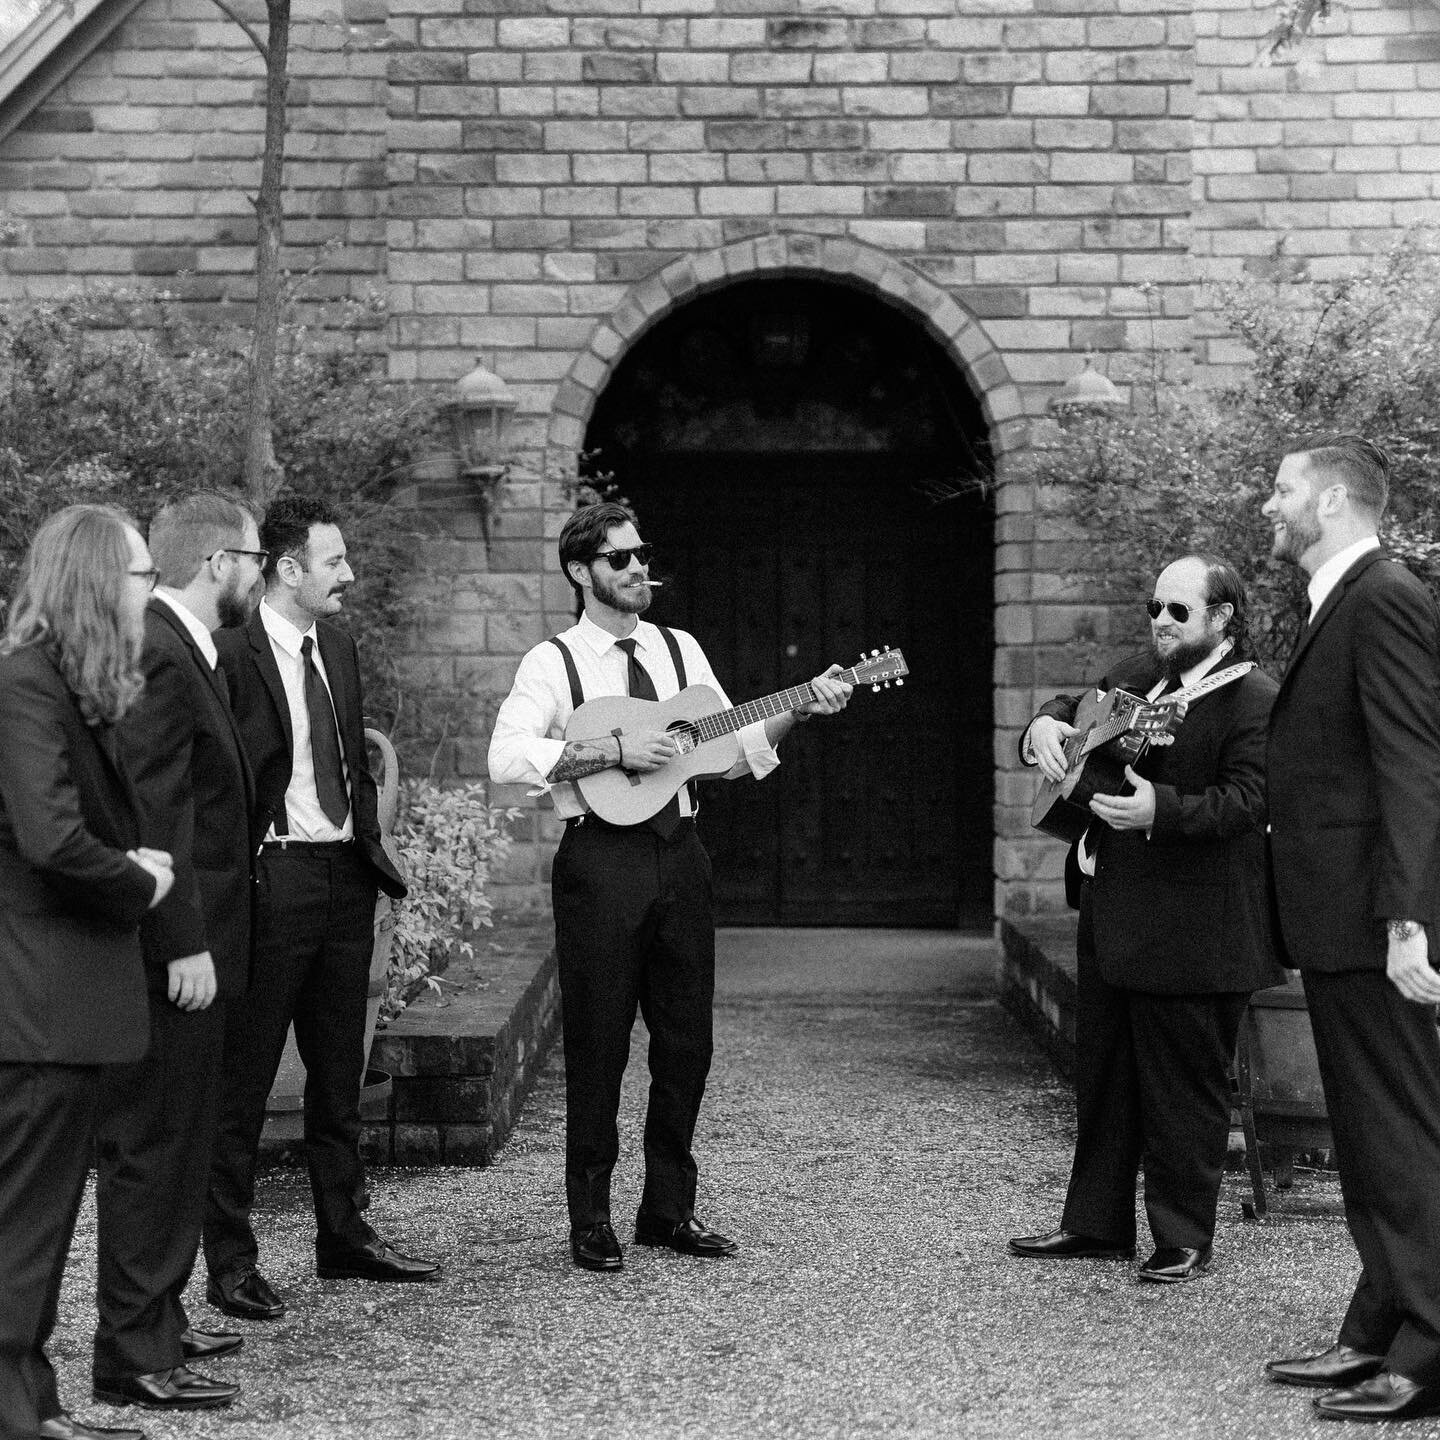 When the groom and his men are musicians, you get jam sessions before the ceremony.